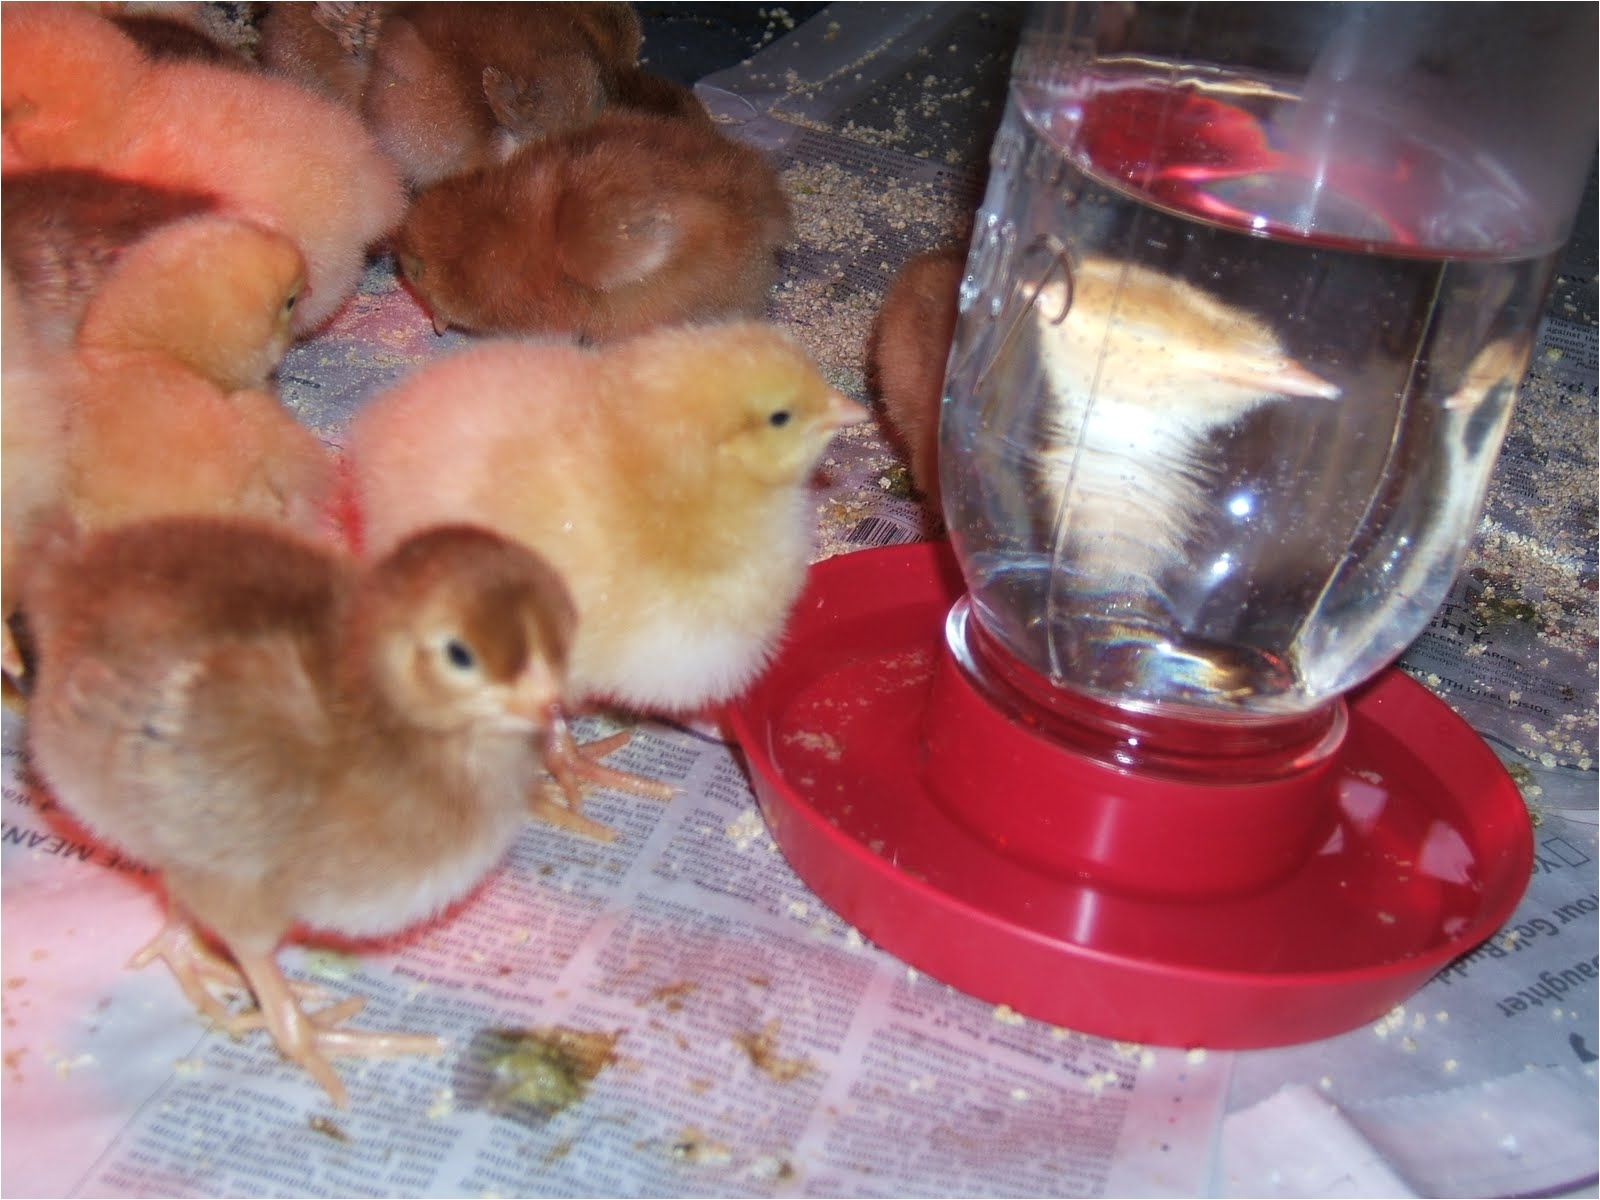 Diy Heat Lamp for Chickens Reader Questions Heat Lamps and Baby Chicks Community Chickens